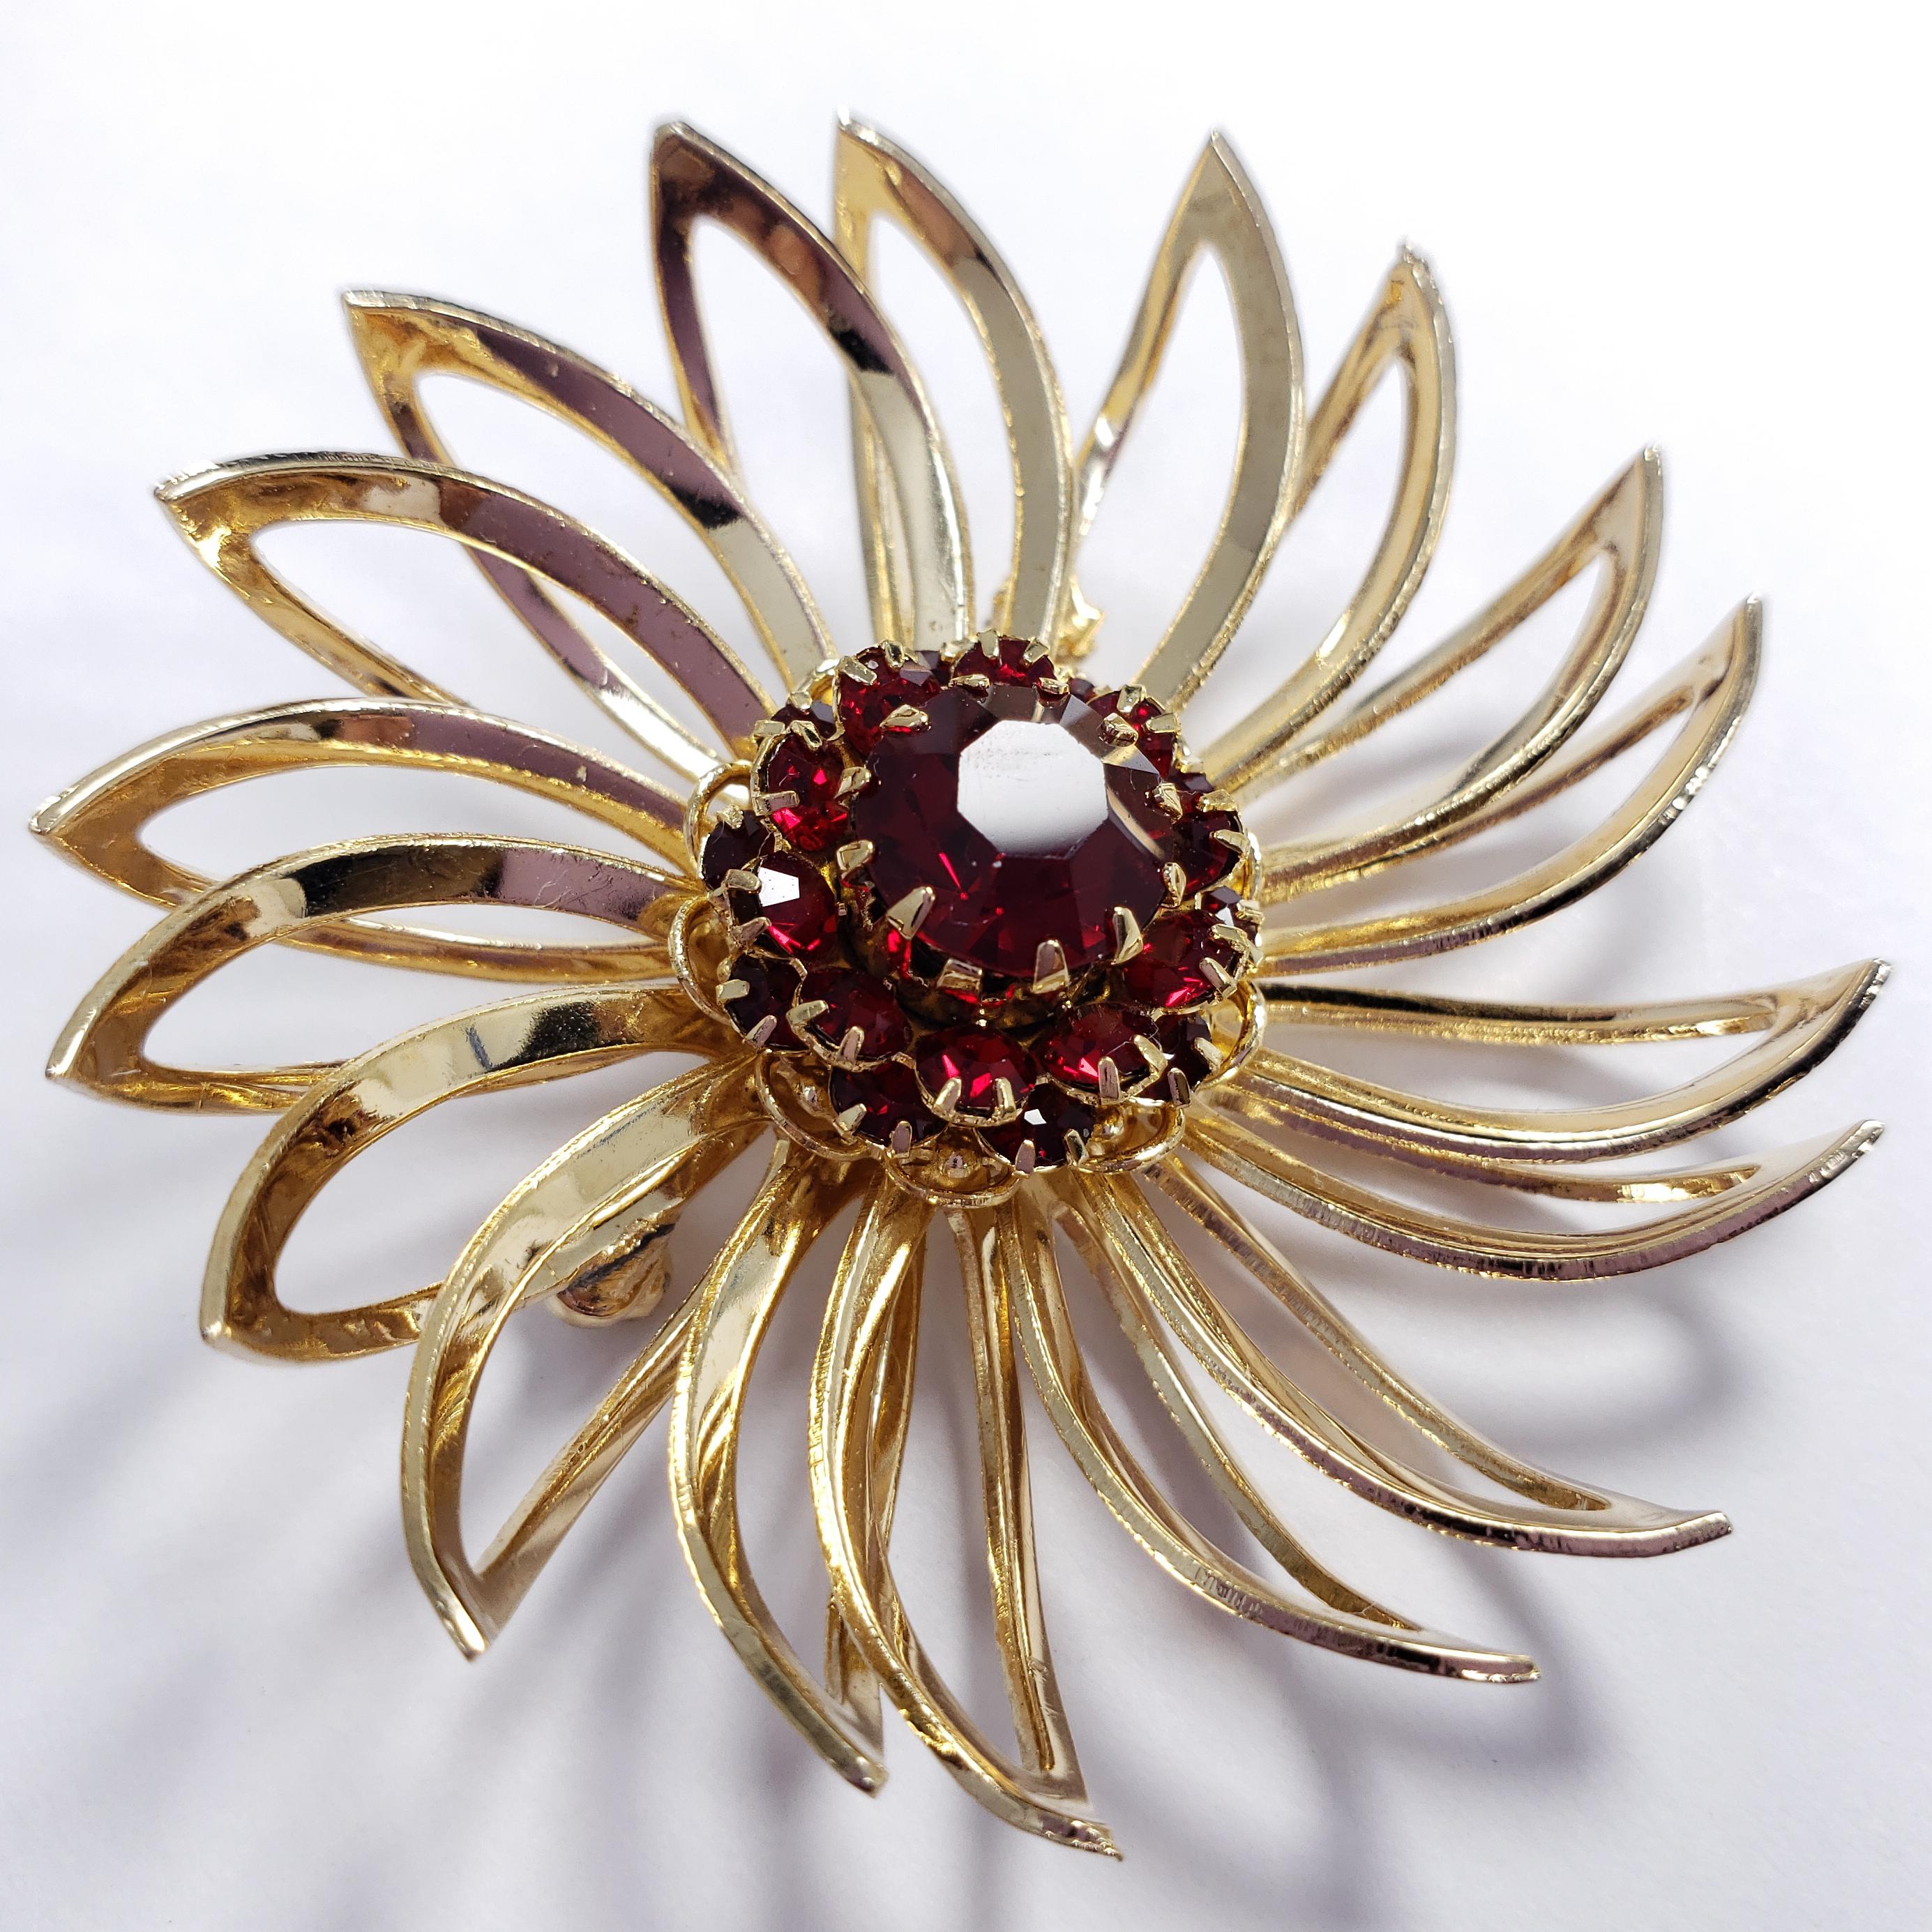 A stylish pin brooch by Sarah Coventry. Features curved goldtone petals and a centerpiece faceted red crystal, accented with smaller crystals.

Hallmarks: © SARAH COV